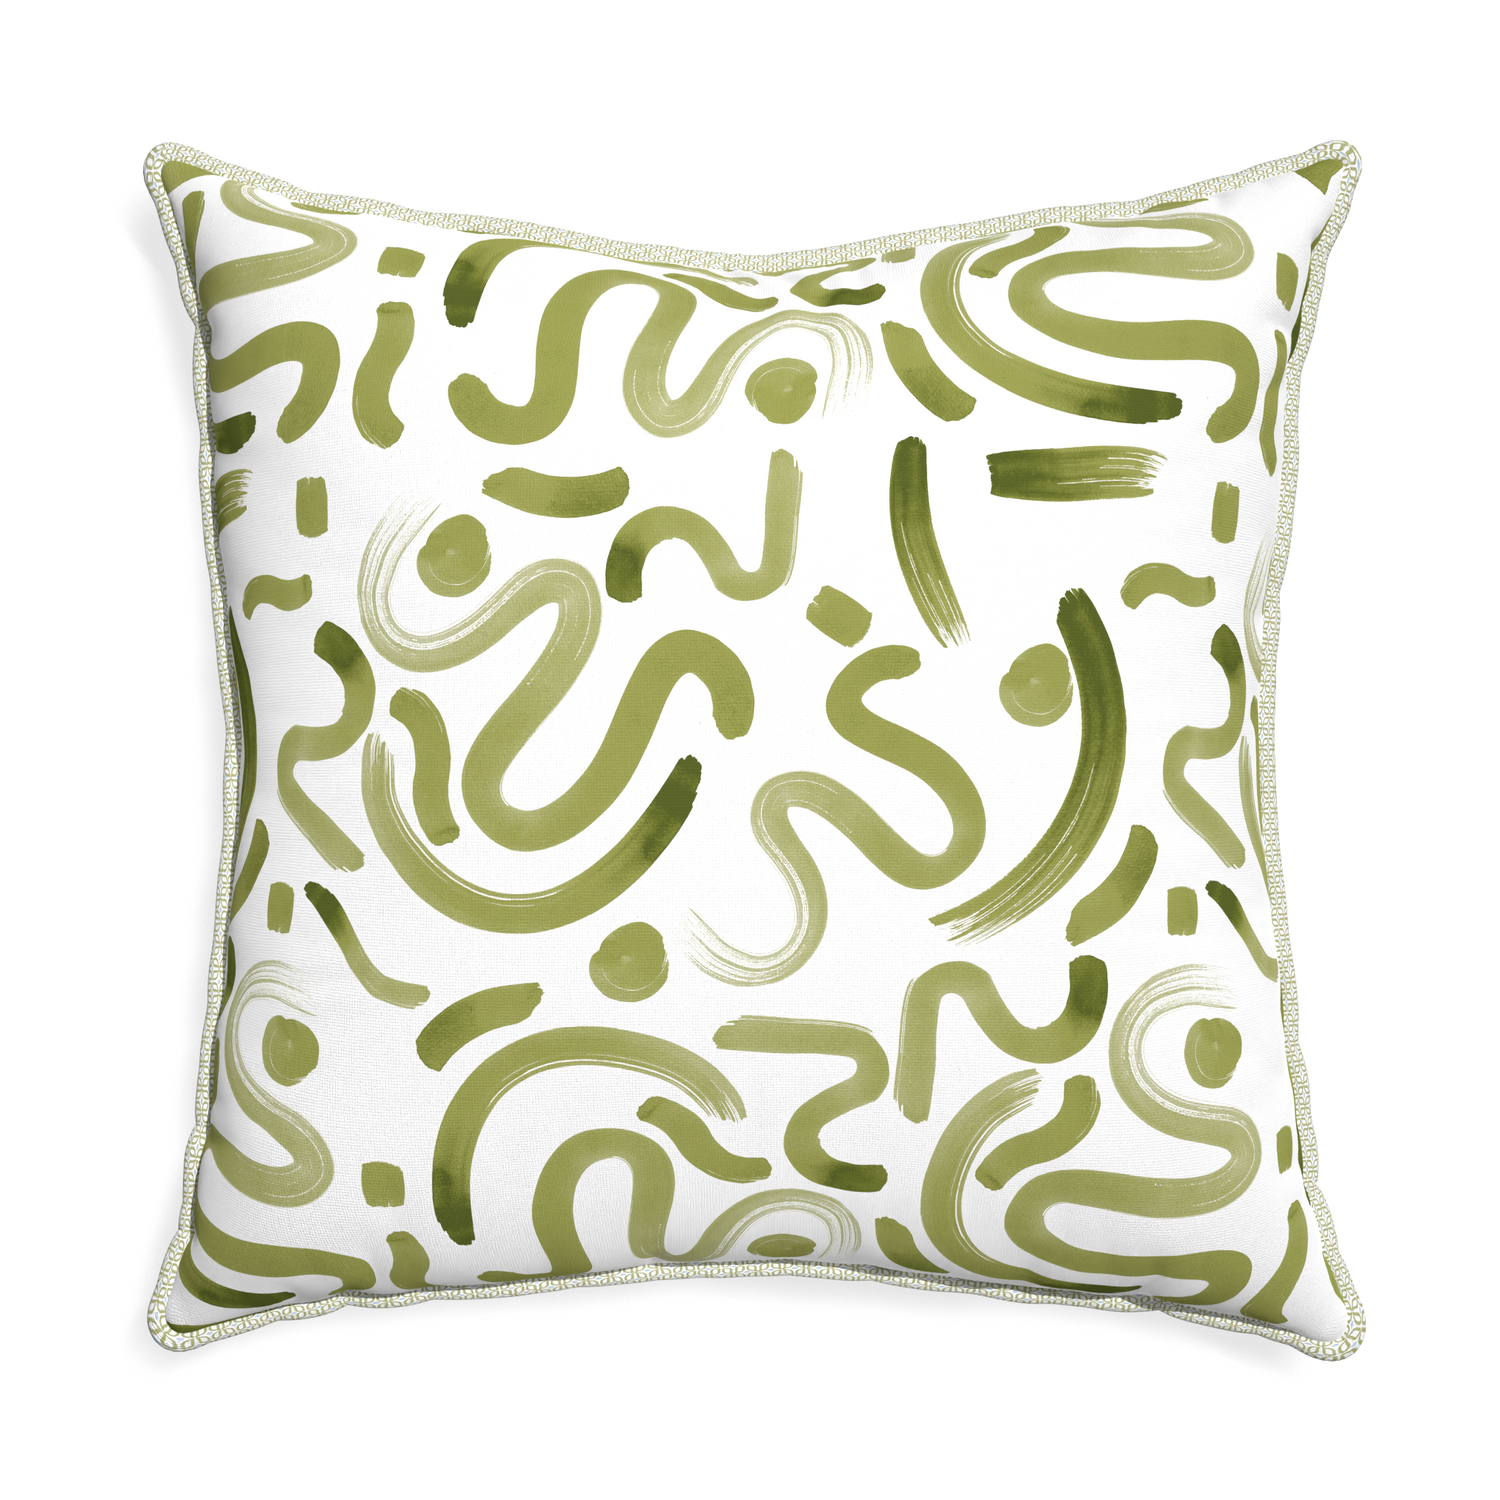 Euro-sham hockney moss custom moss greenpillow with l piping on white background